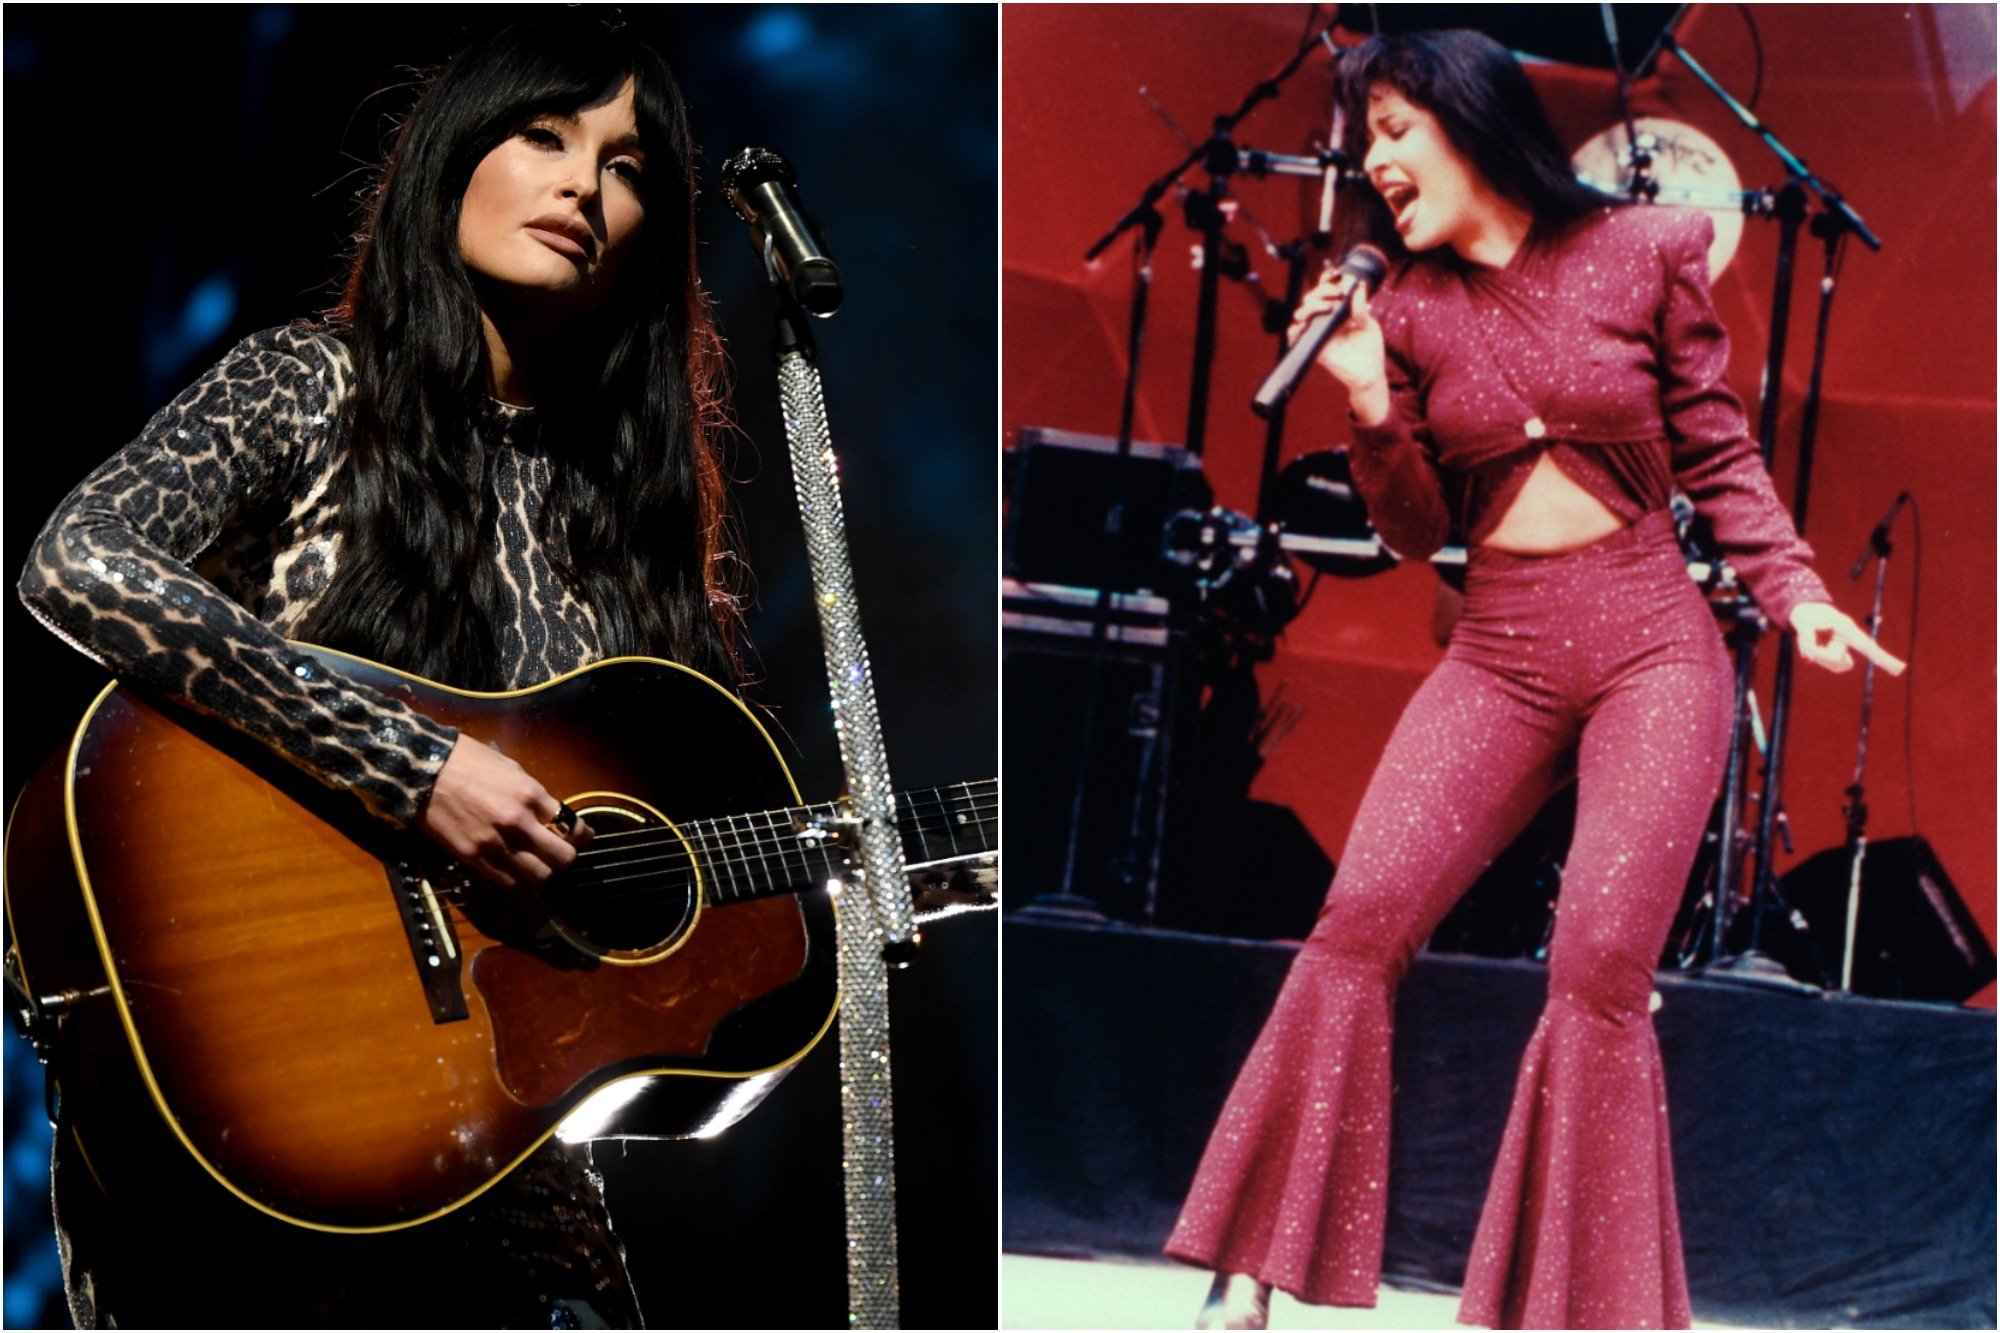 Kacey Musgraves and Selena Quintanilla 1 Similar Thing With Their The Country Singer